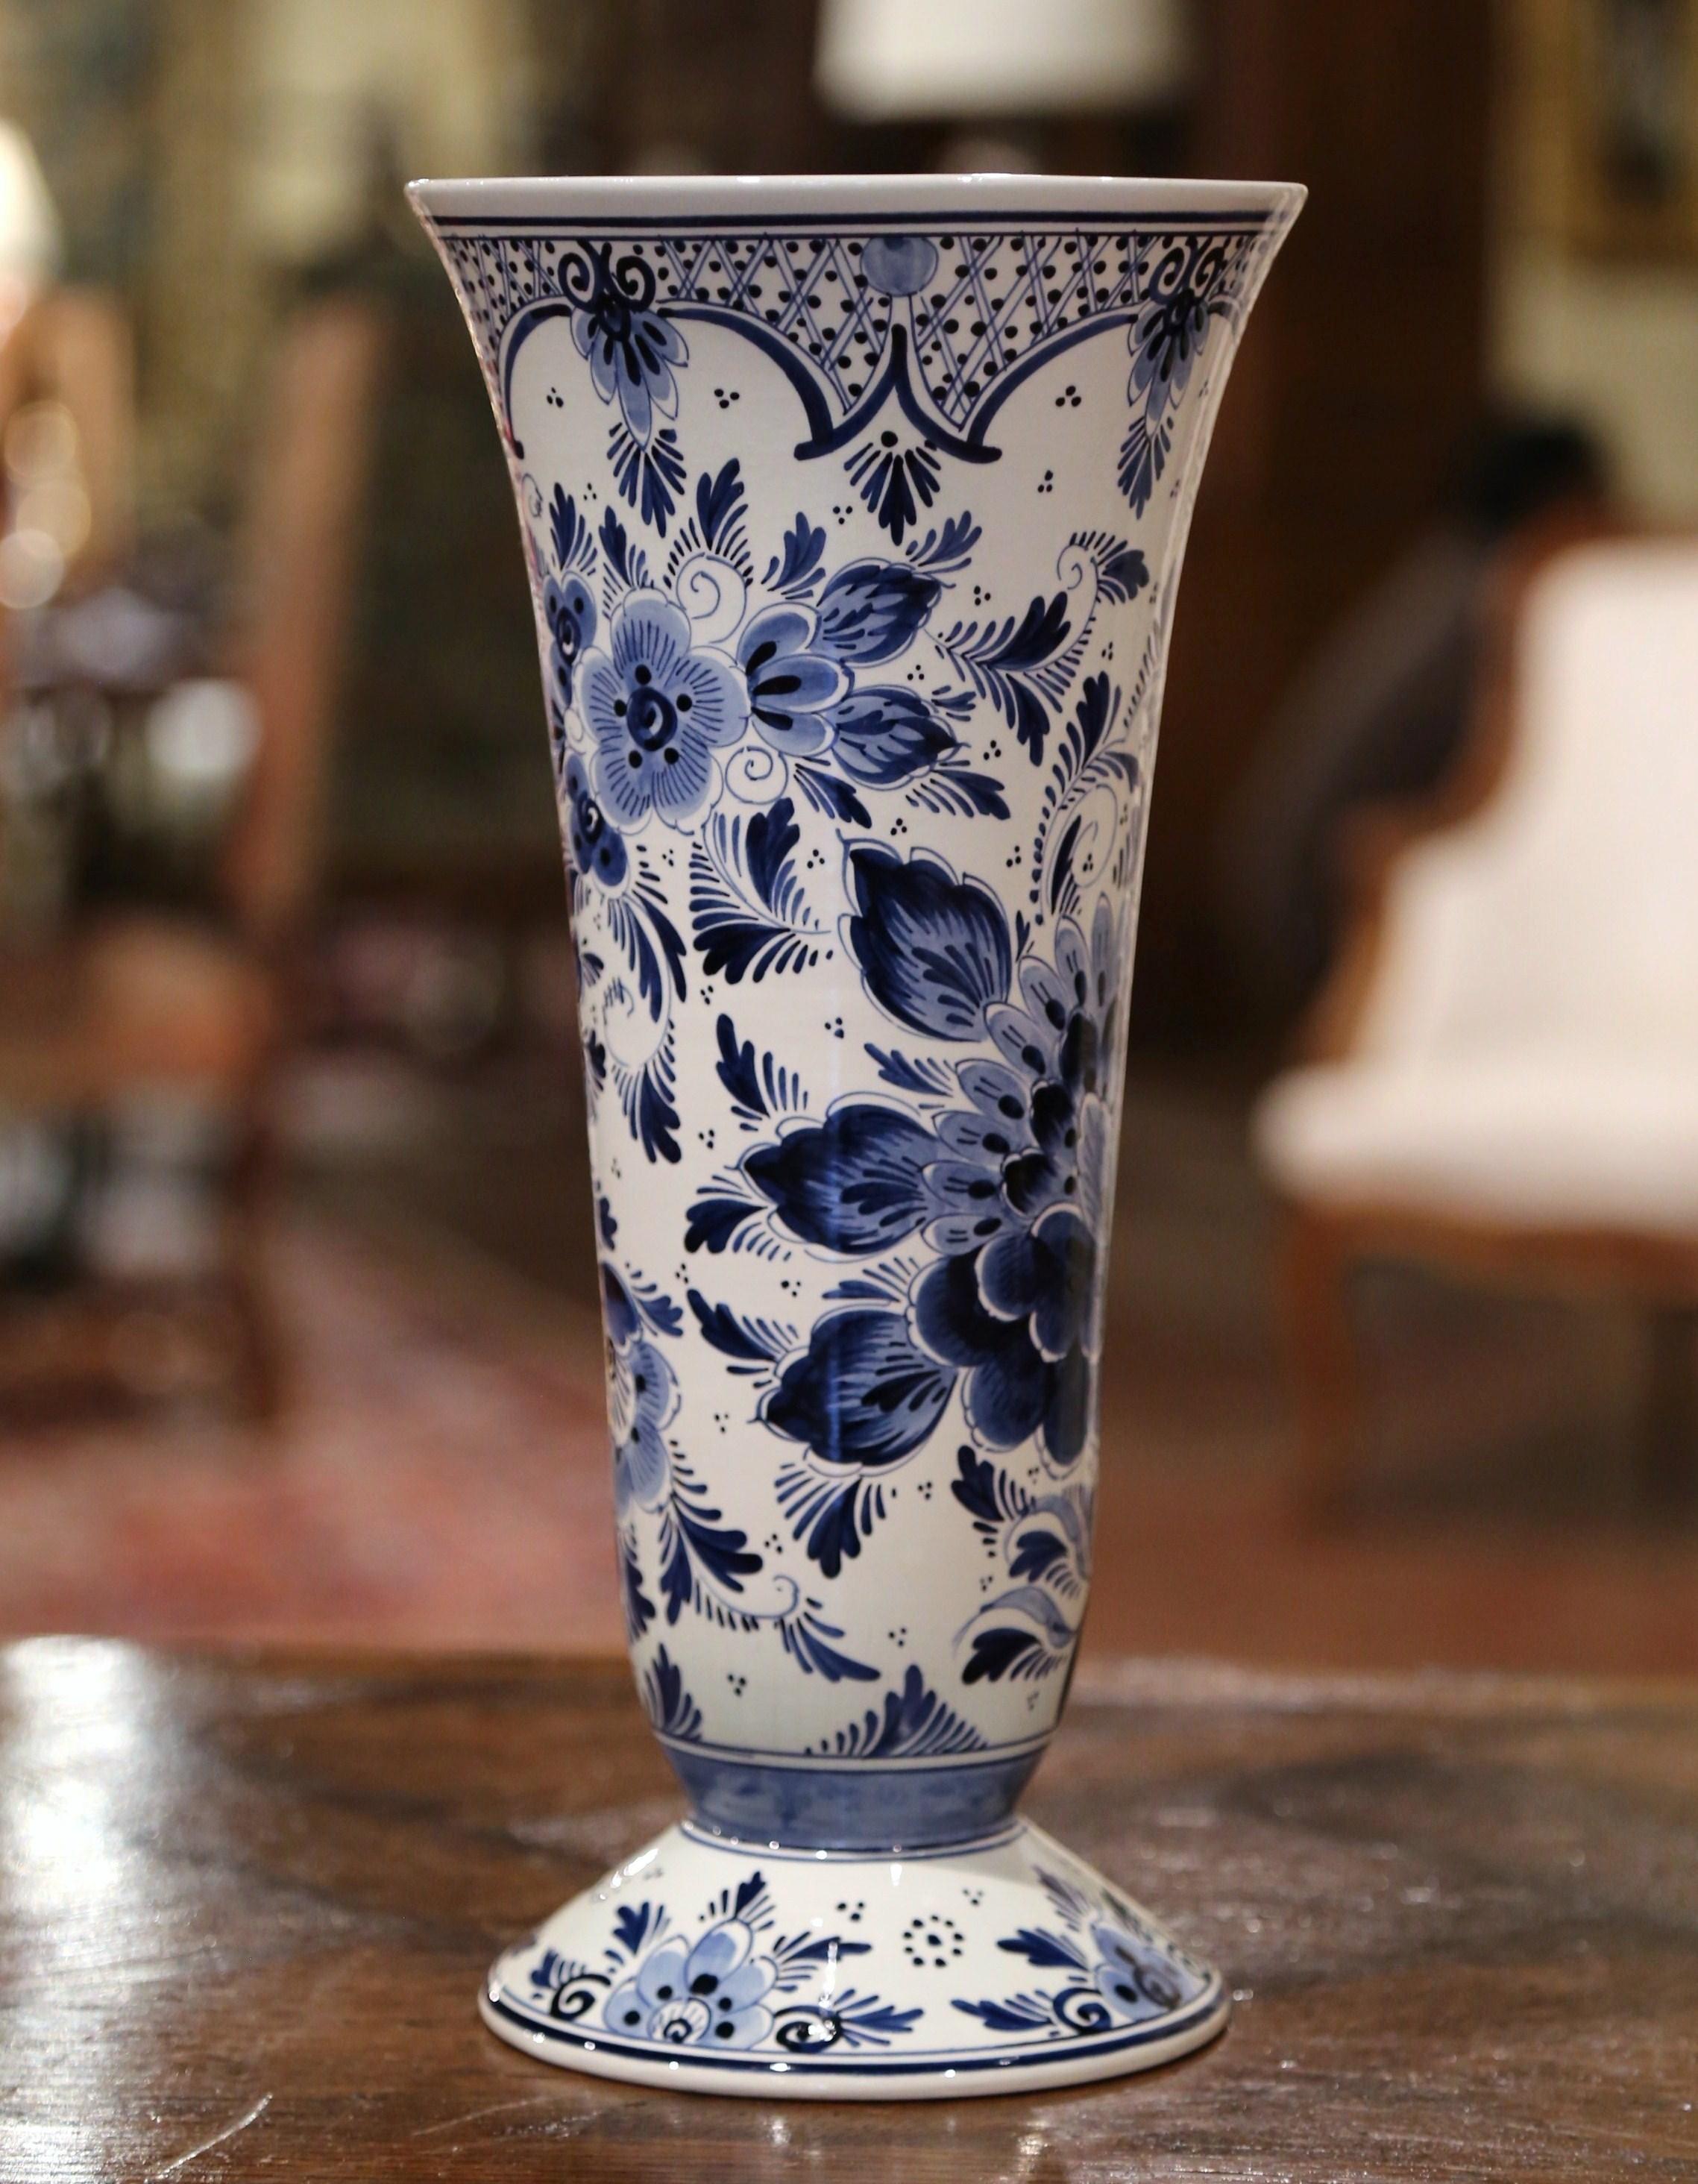 20th Century Midcentury Dutch Hand Painted Blue and White Delft Faience Vase with Bird Motif